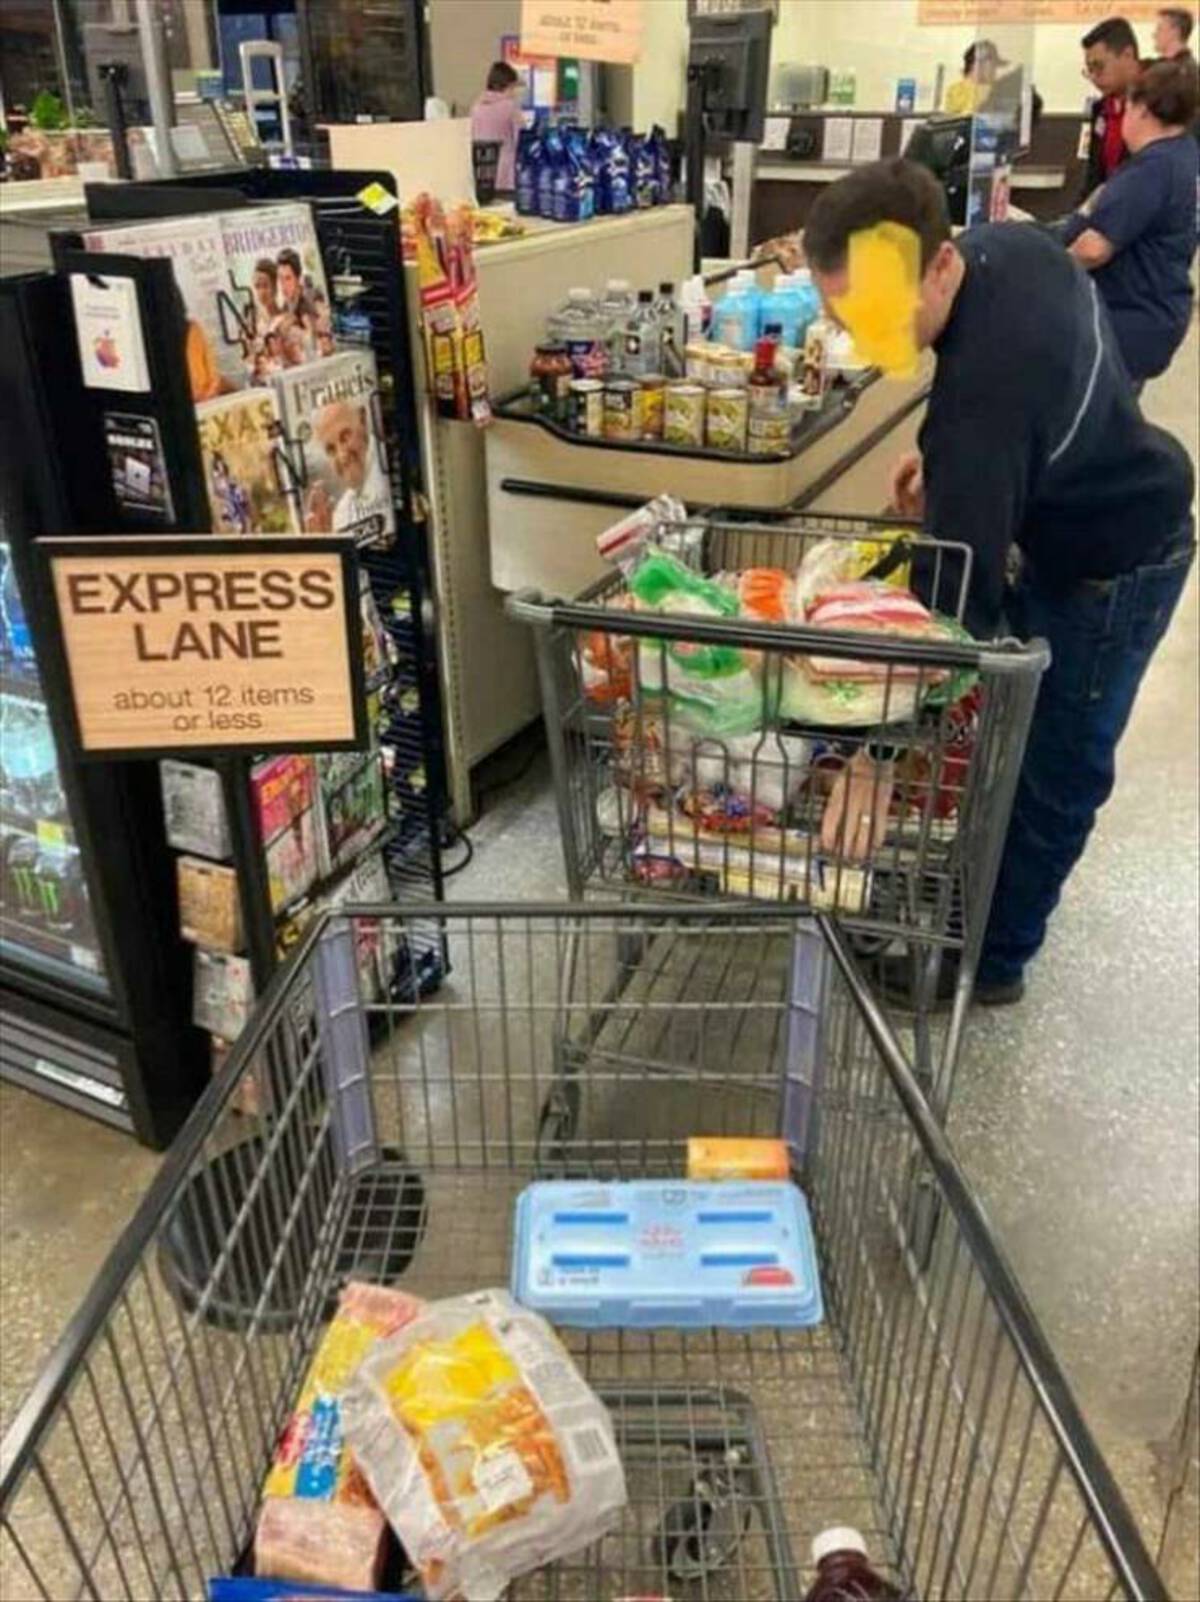 grocery store - Bridgerto Xas Francis Express Lane about 12 items or less